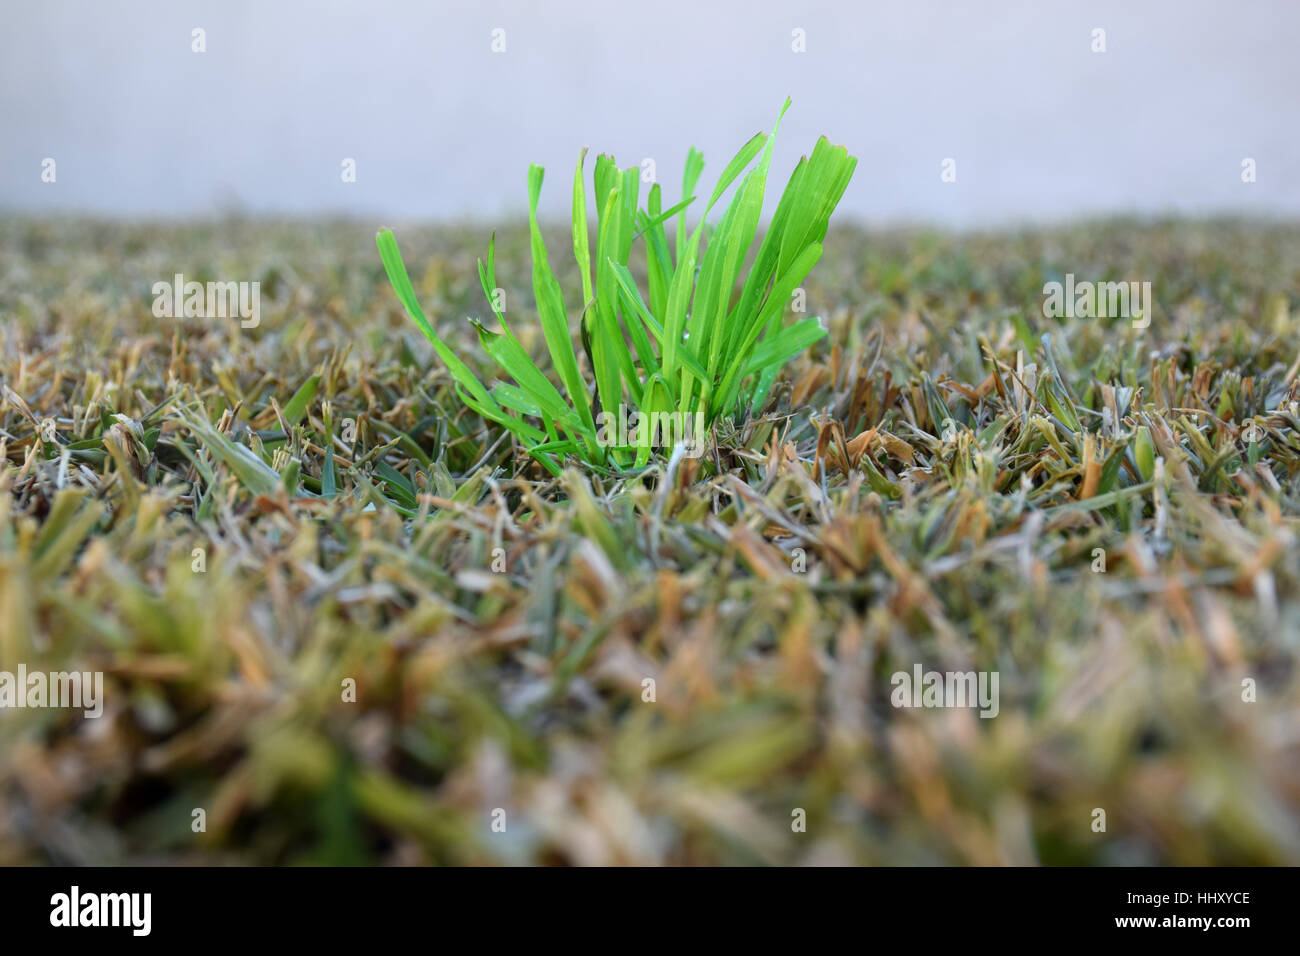 Rebirth concept, the green wires on the dry grass Stock Photo